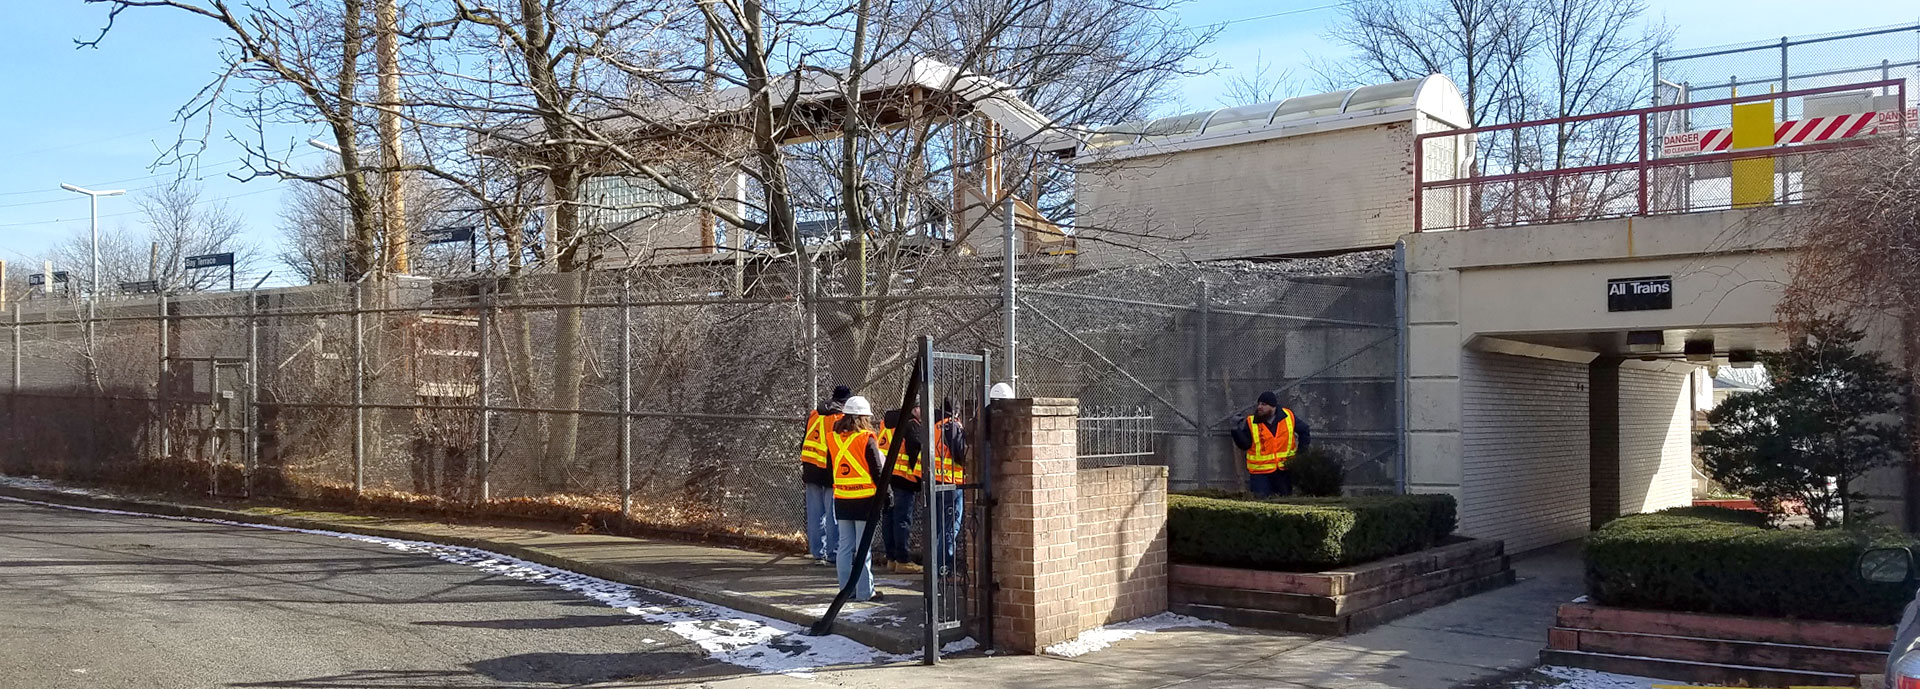 people in high vis vests and hard hats walking into a building with chain link fences and trees